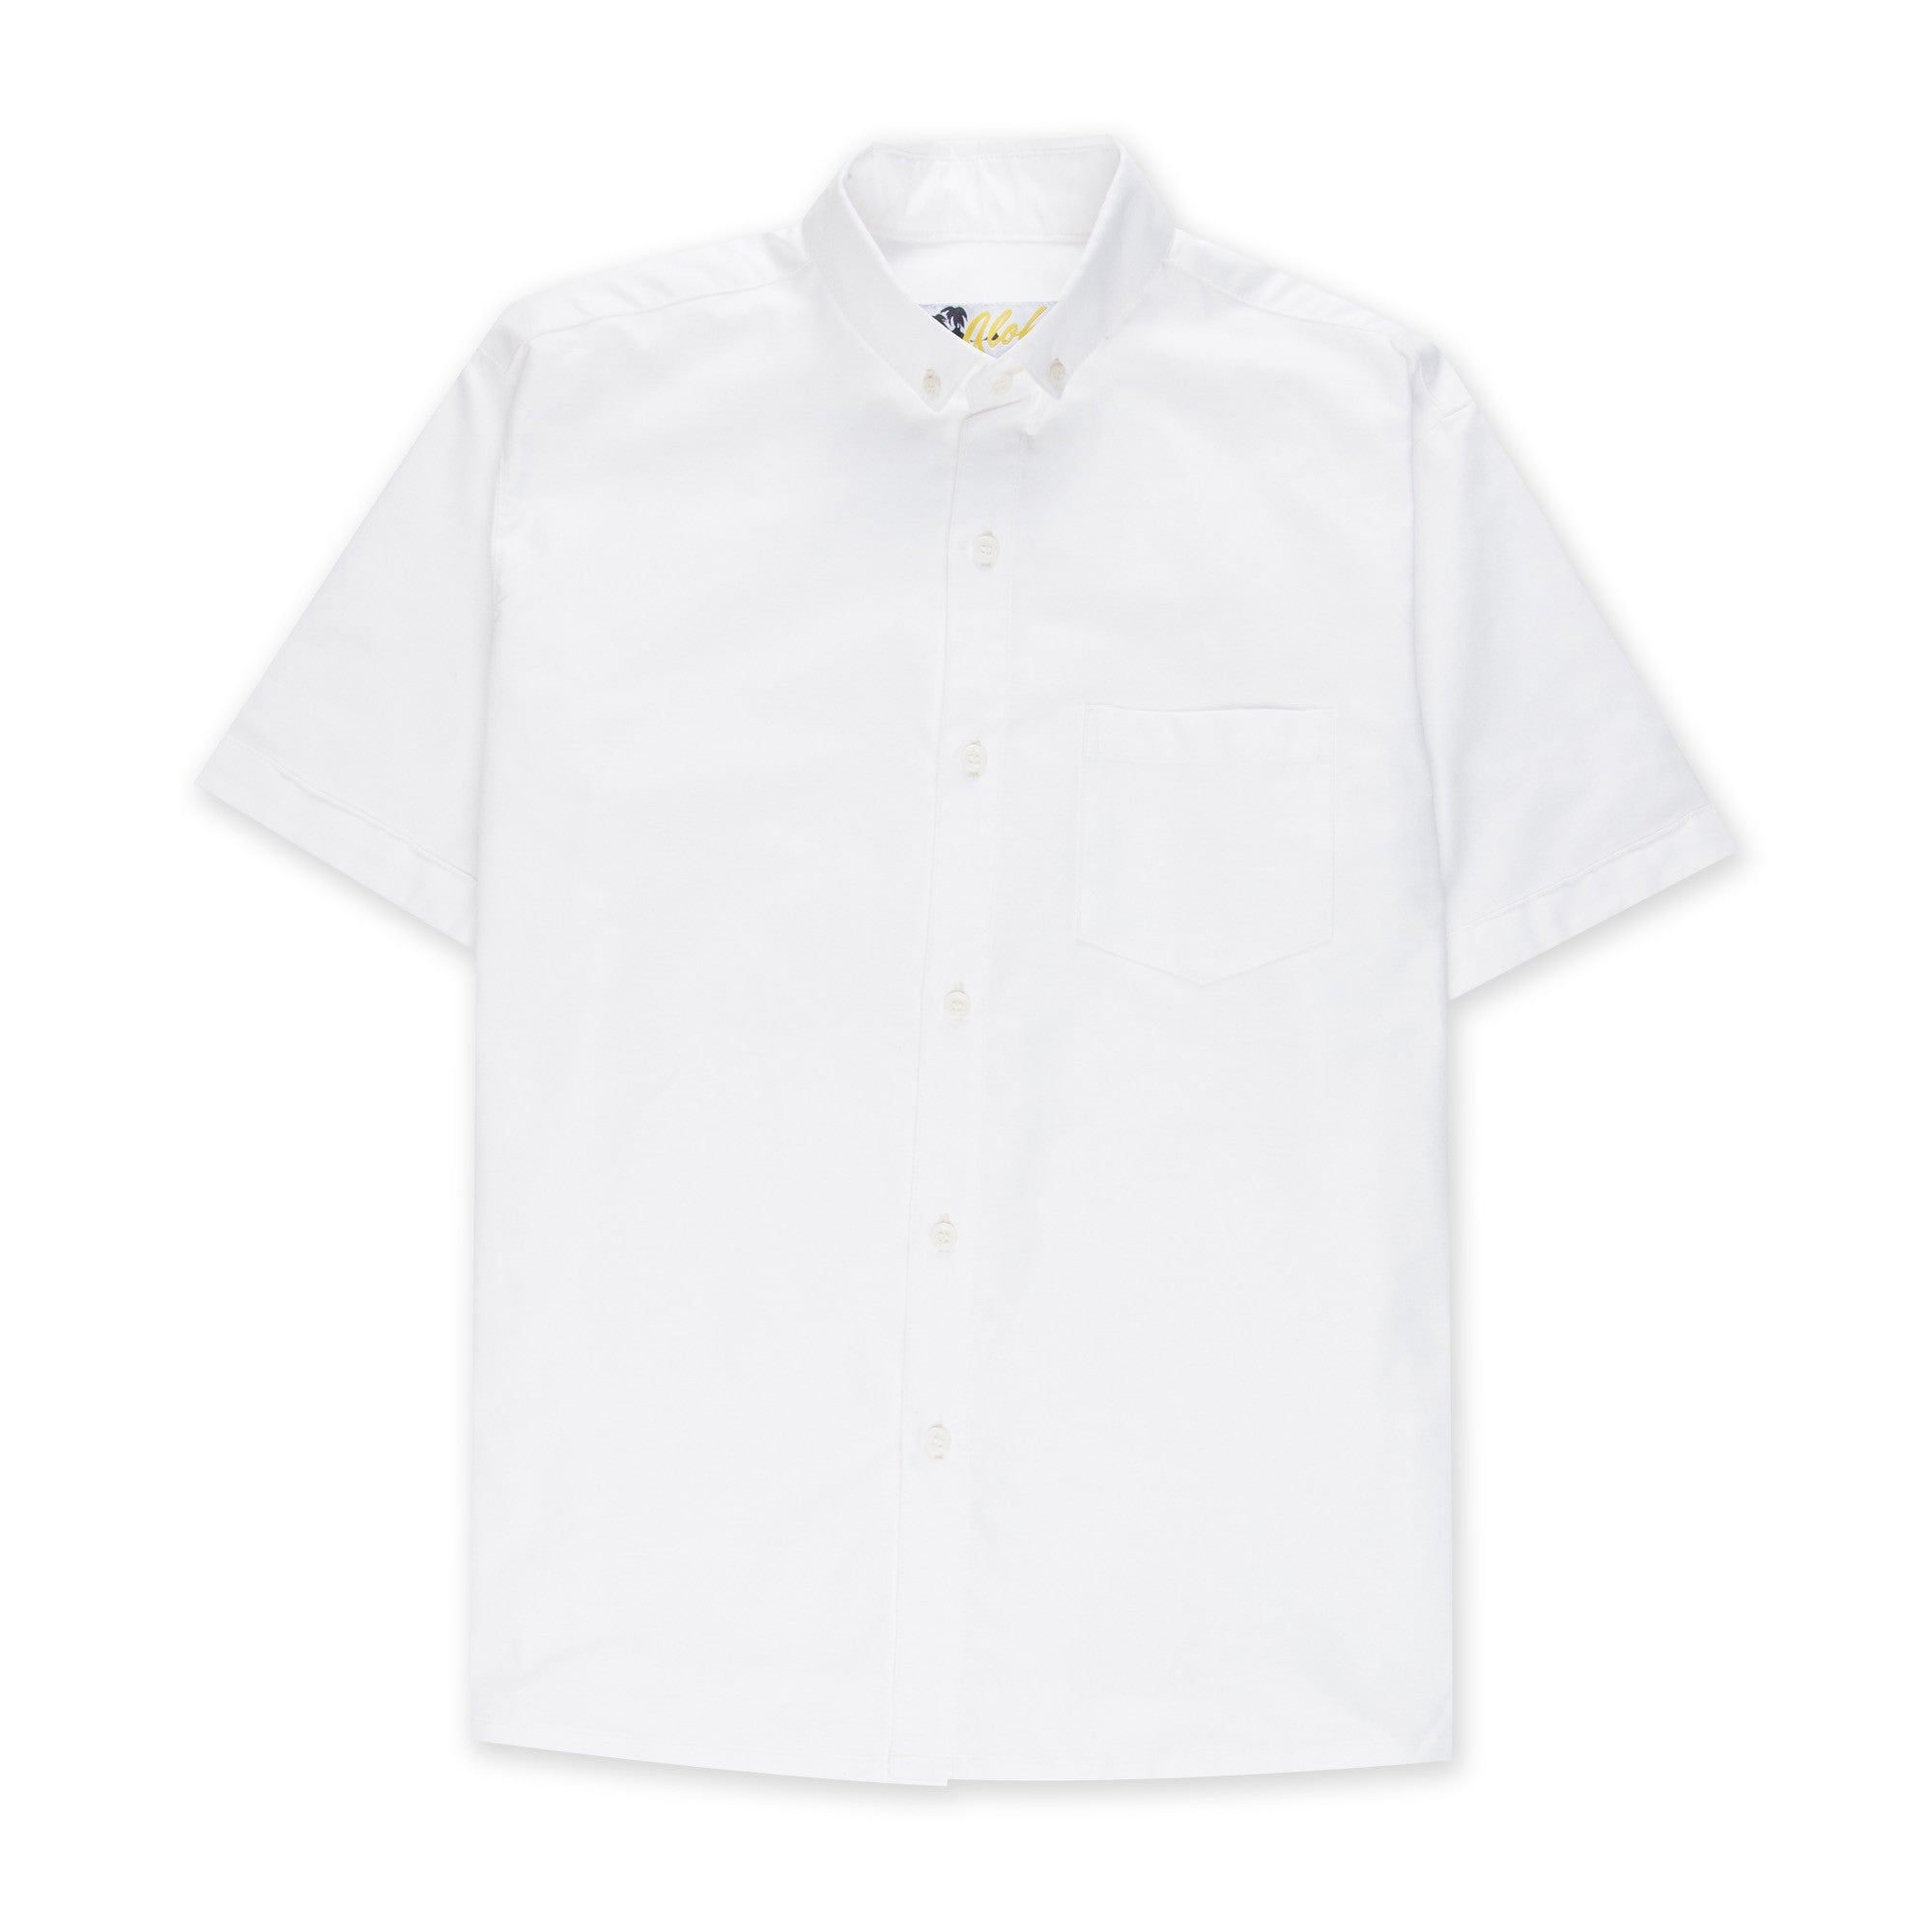 polo tees pack century 21